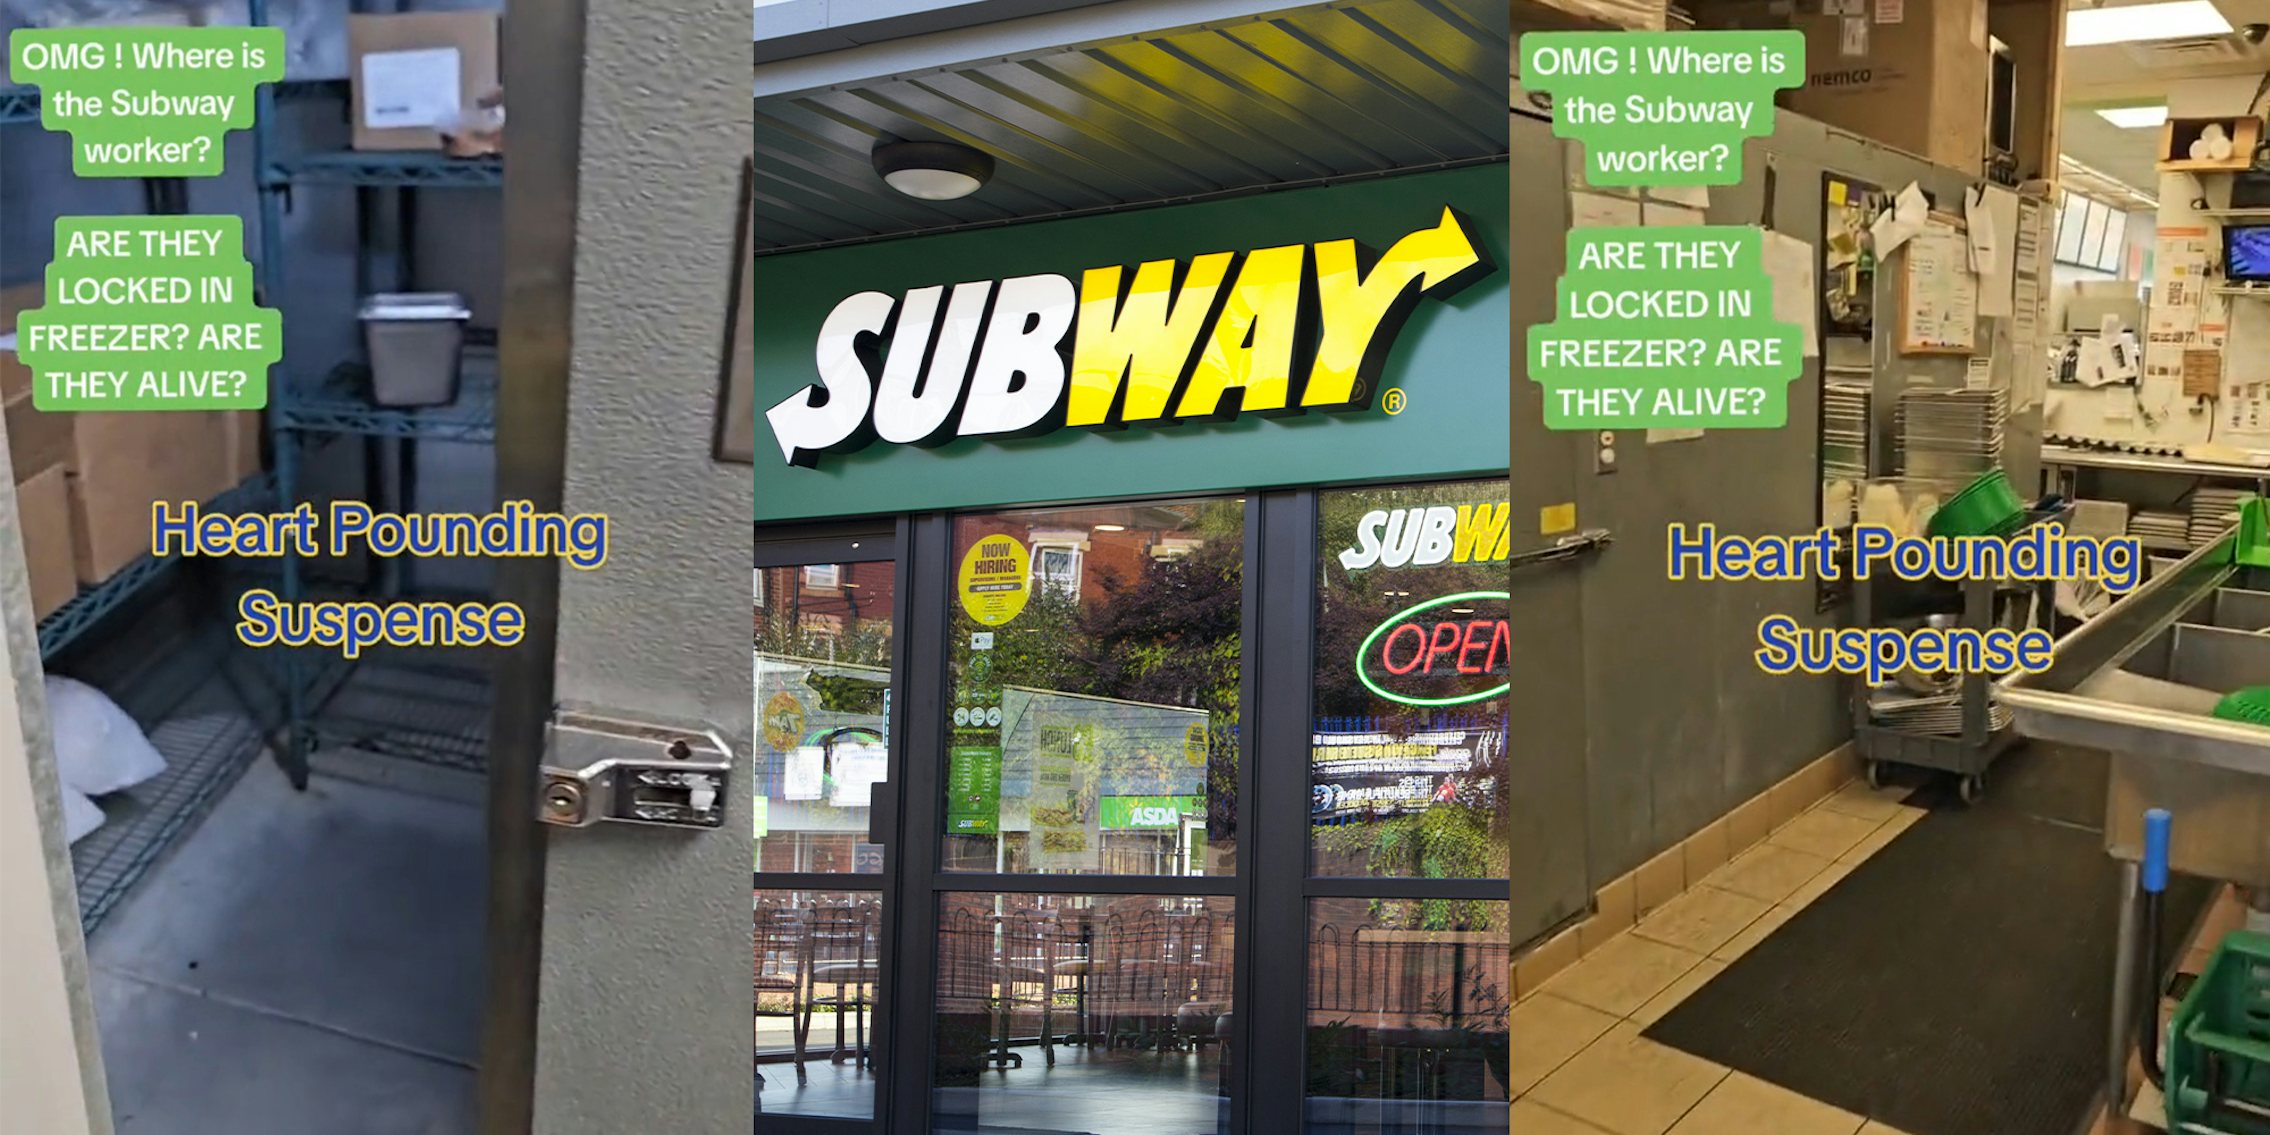 Subway customer could not find worker to take her order and goes to the back